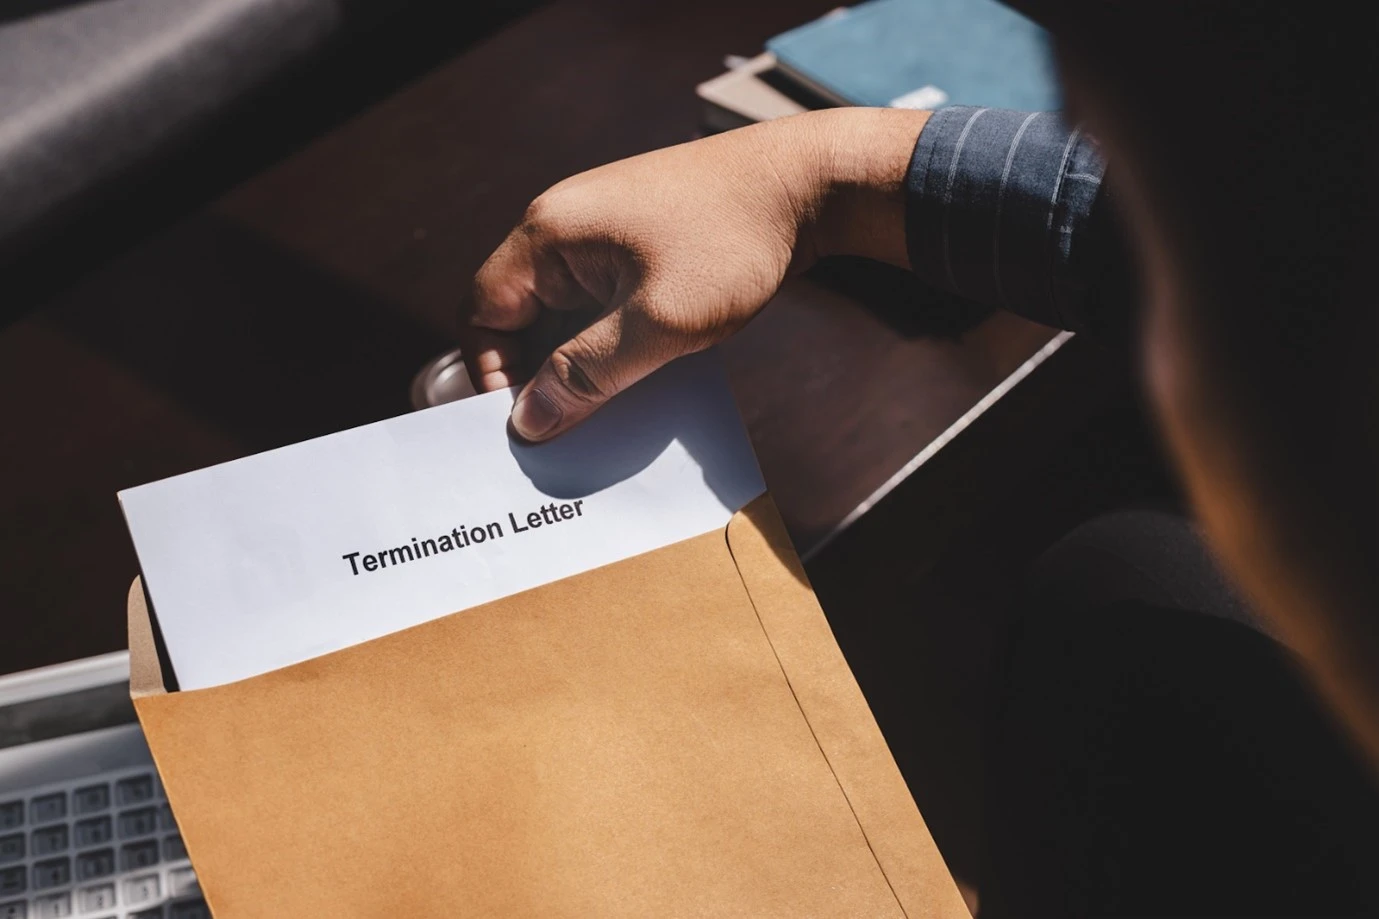 a termination letter for an employees employment contract following the employee's dismissal. 